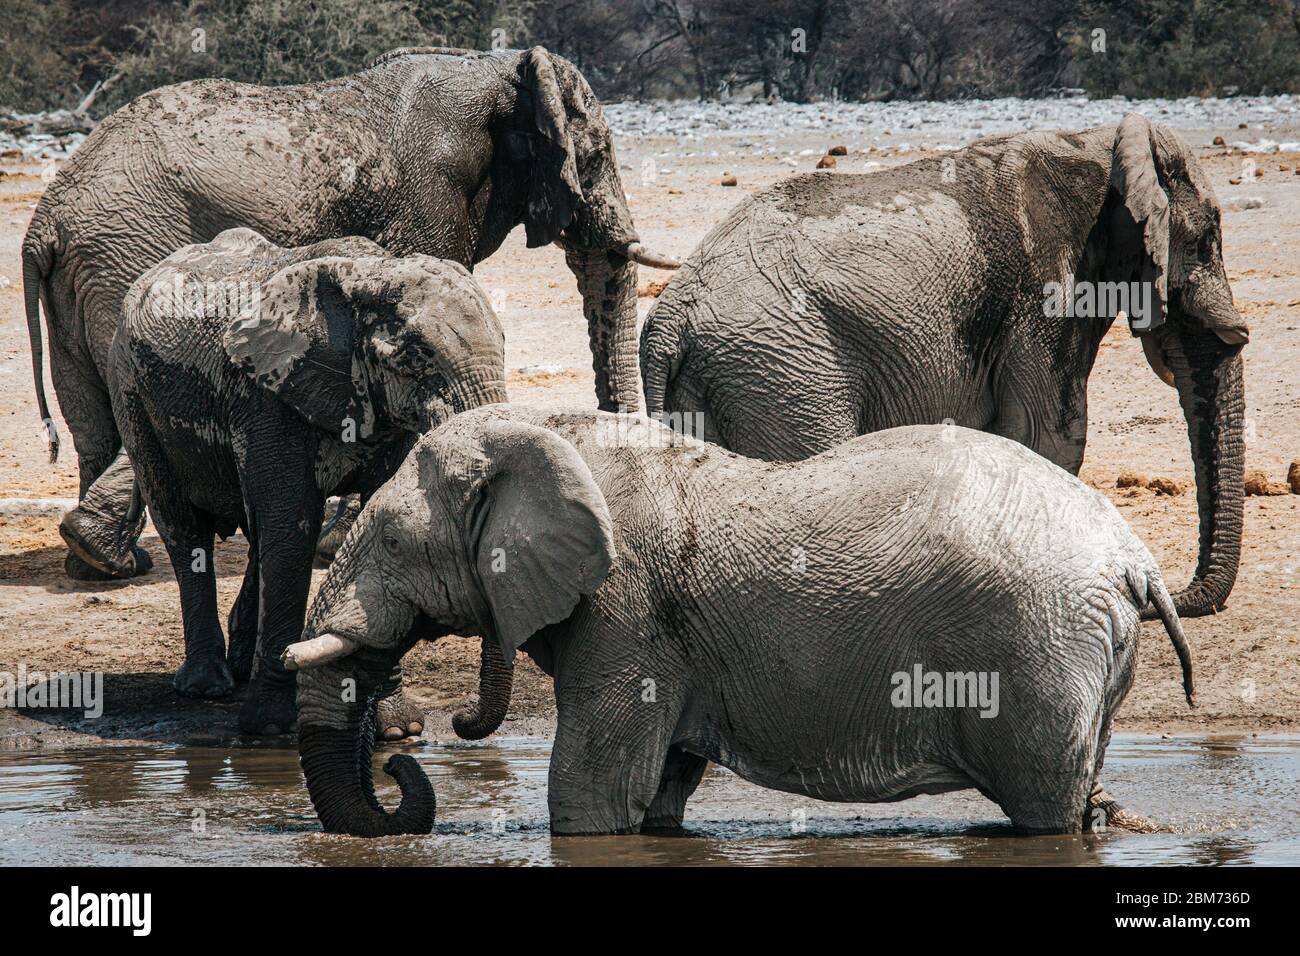 A herd of elephants taking a drink and freshening up in one of the water holes in Etosha national park, Namibia Stock Photo